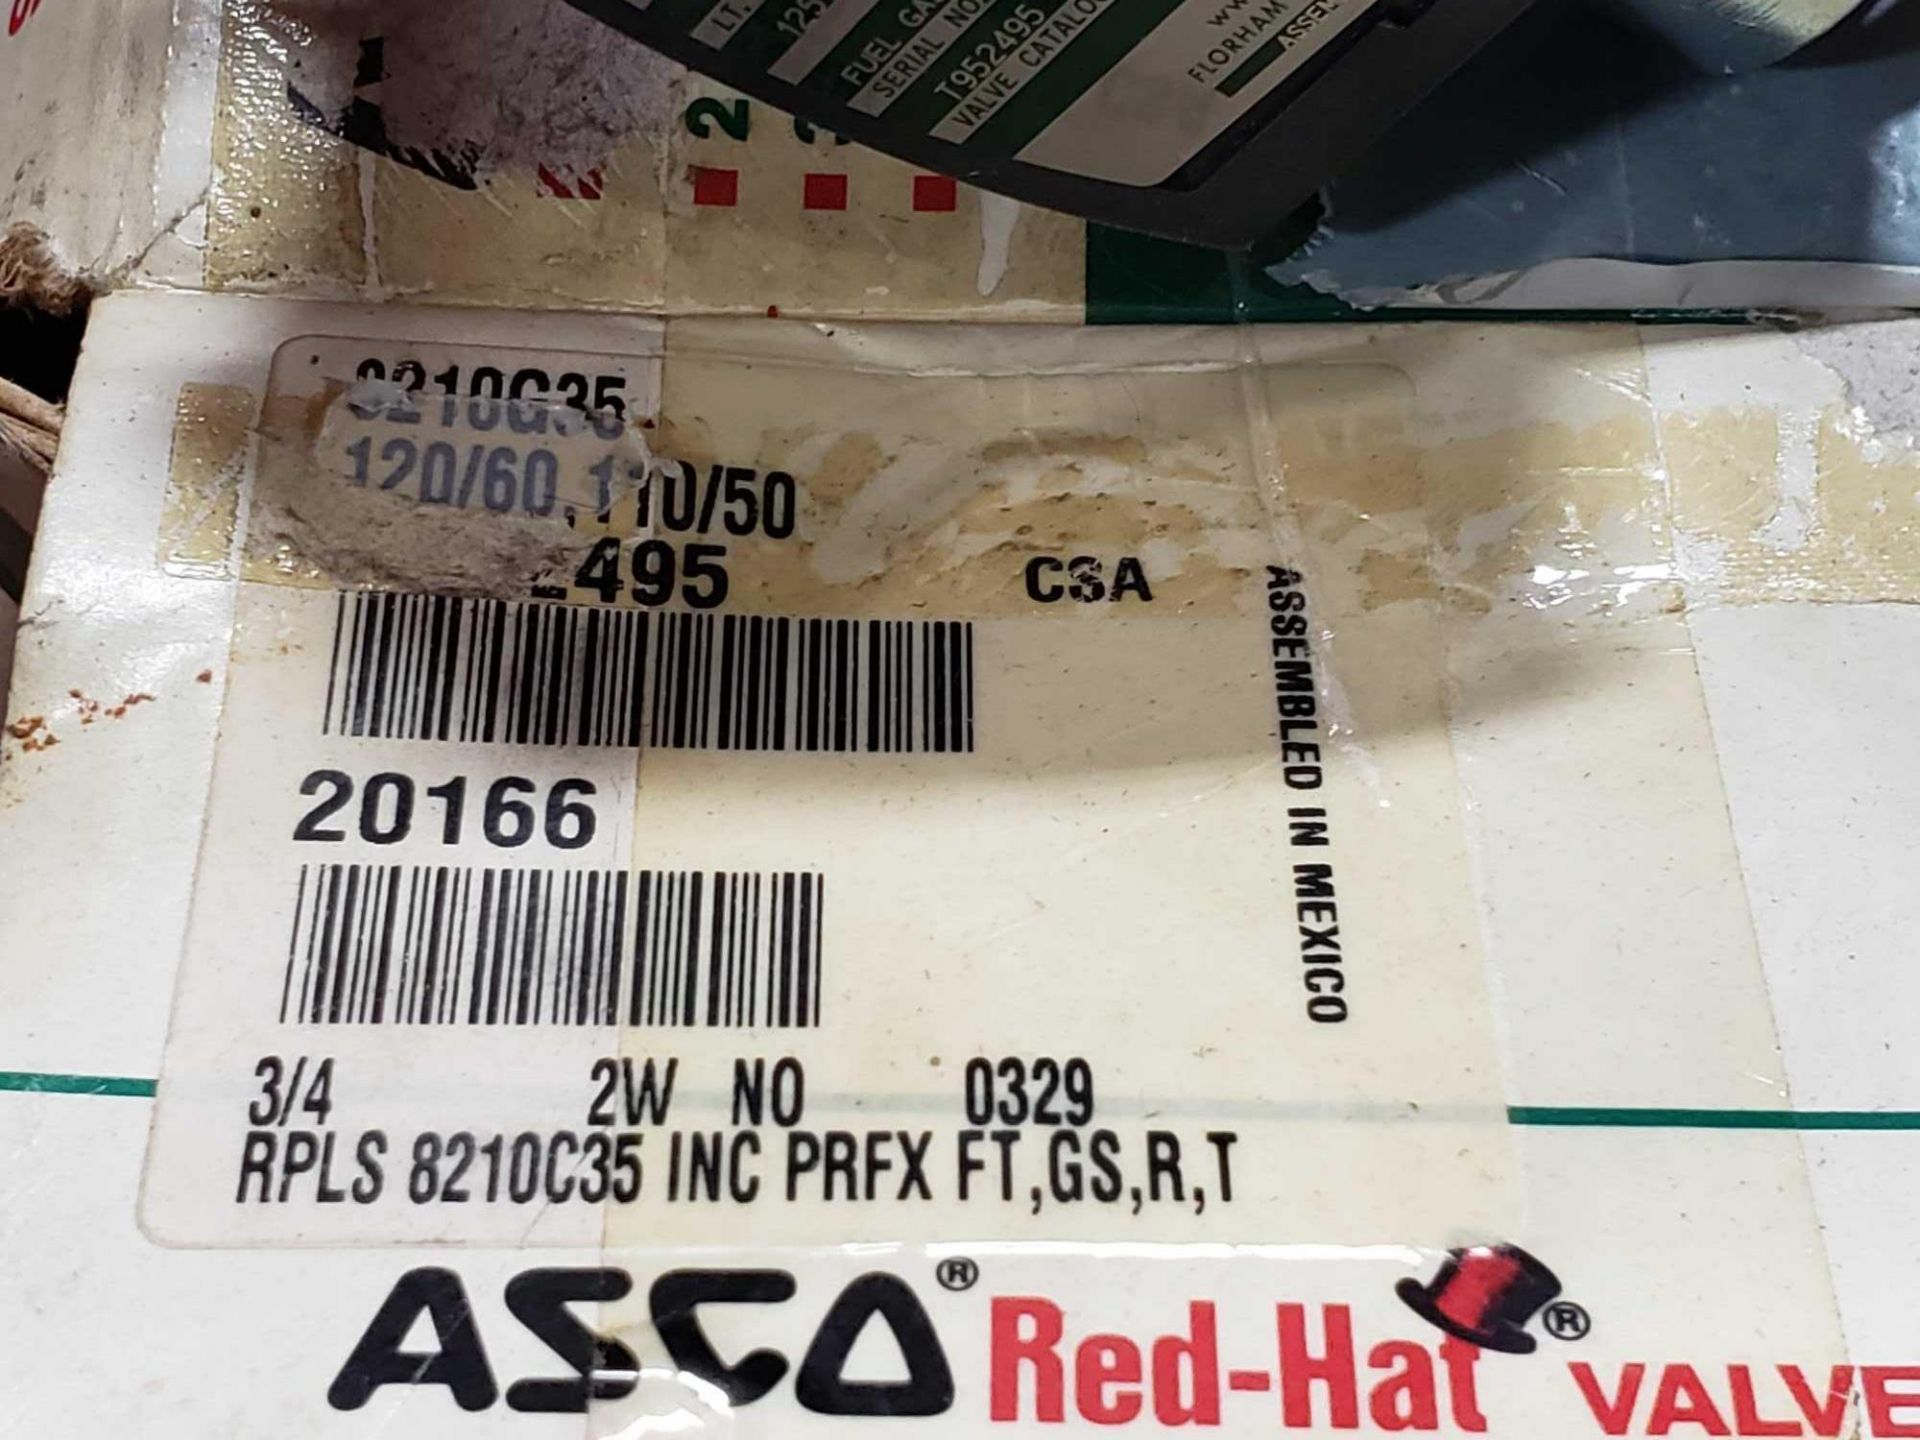 Asco valve part number 8210G35. New in box. - Image 2 of 3